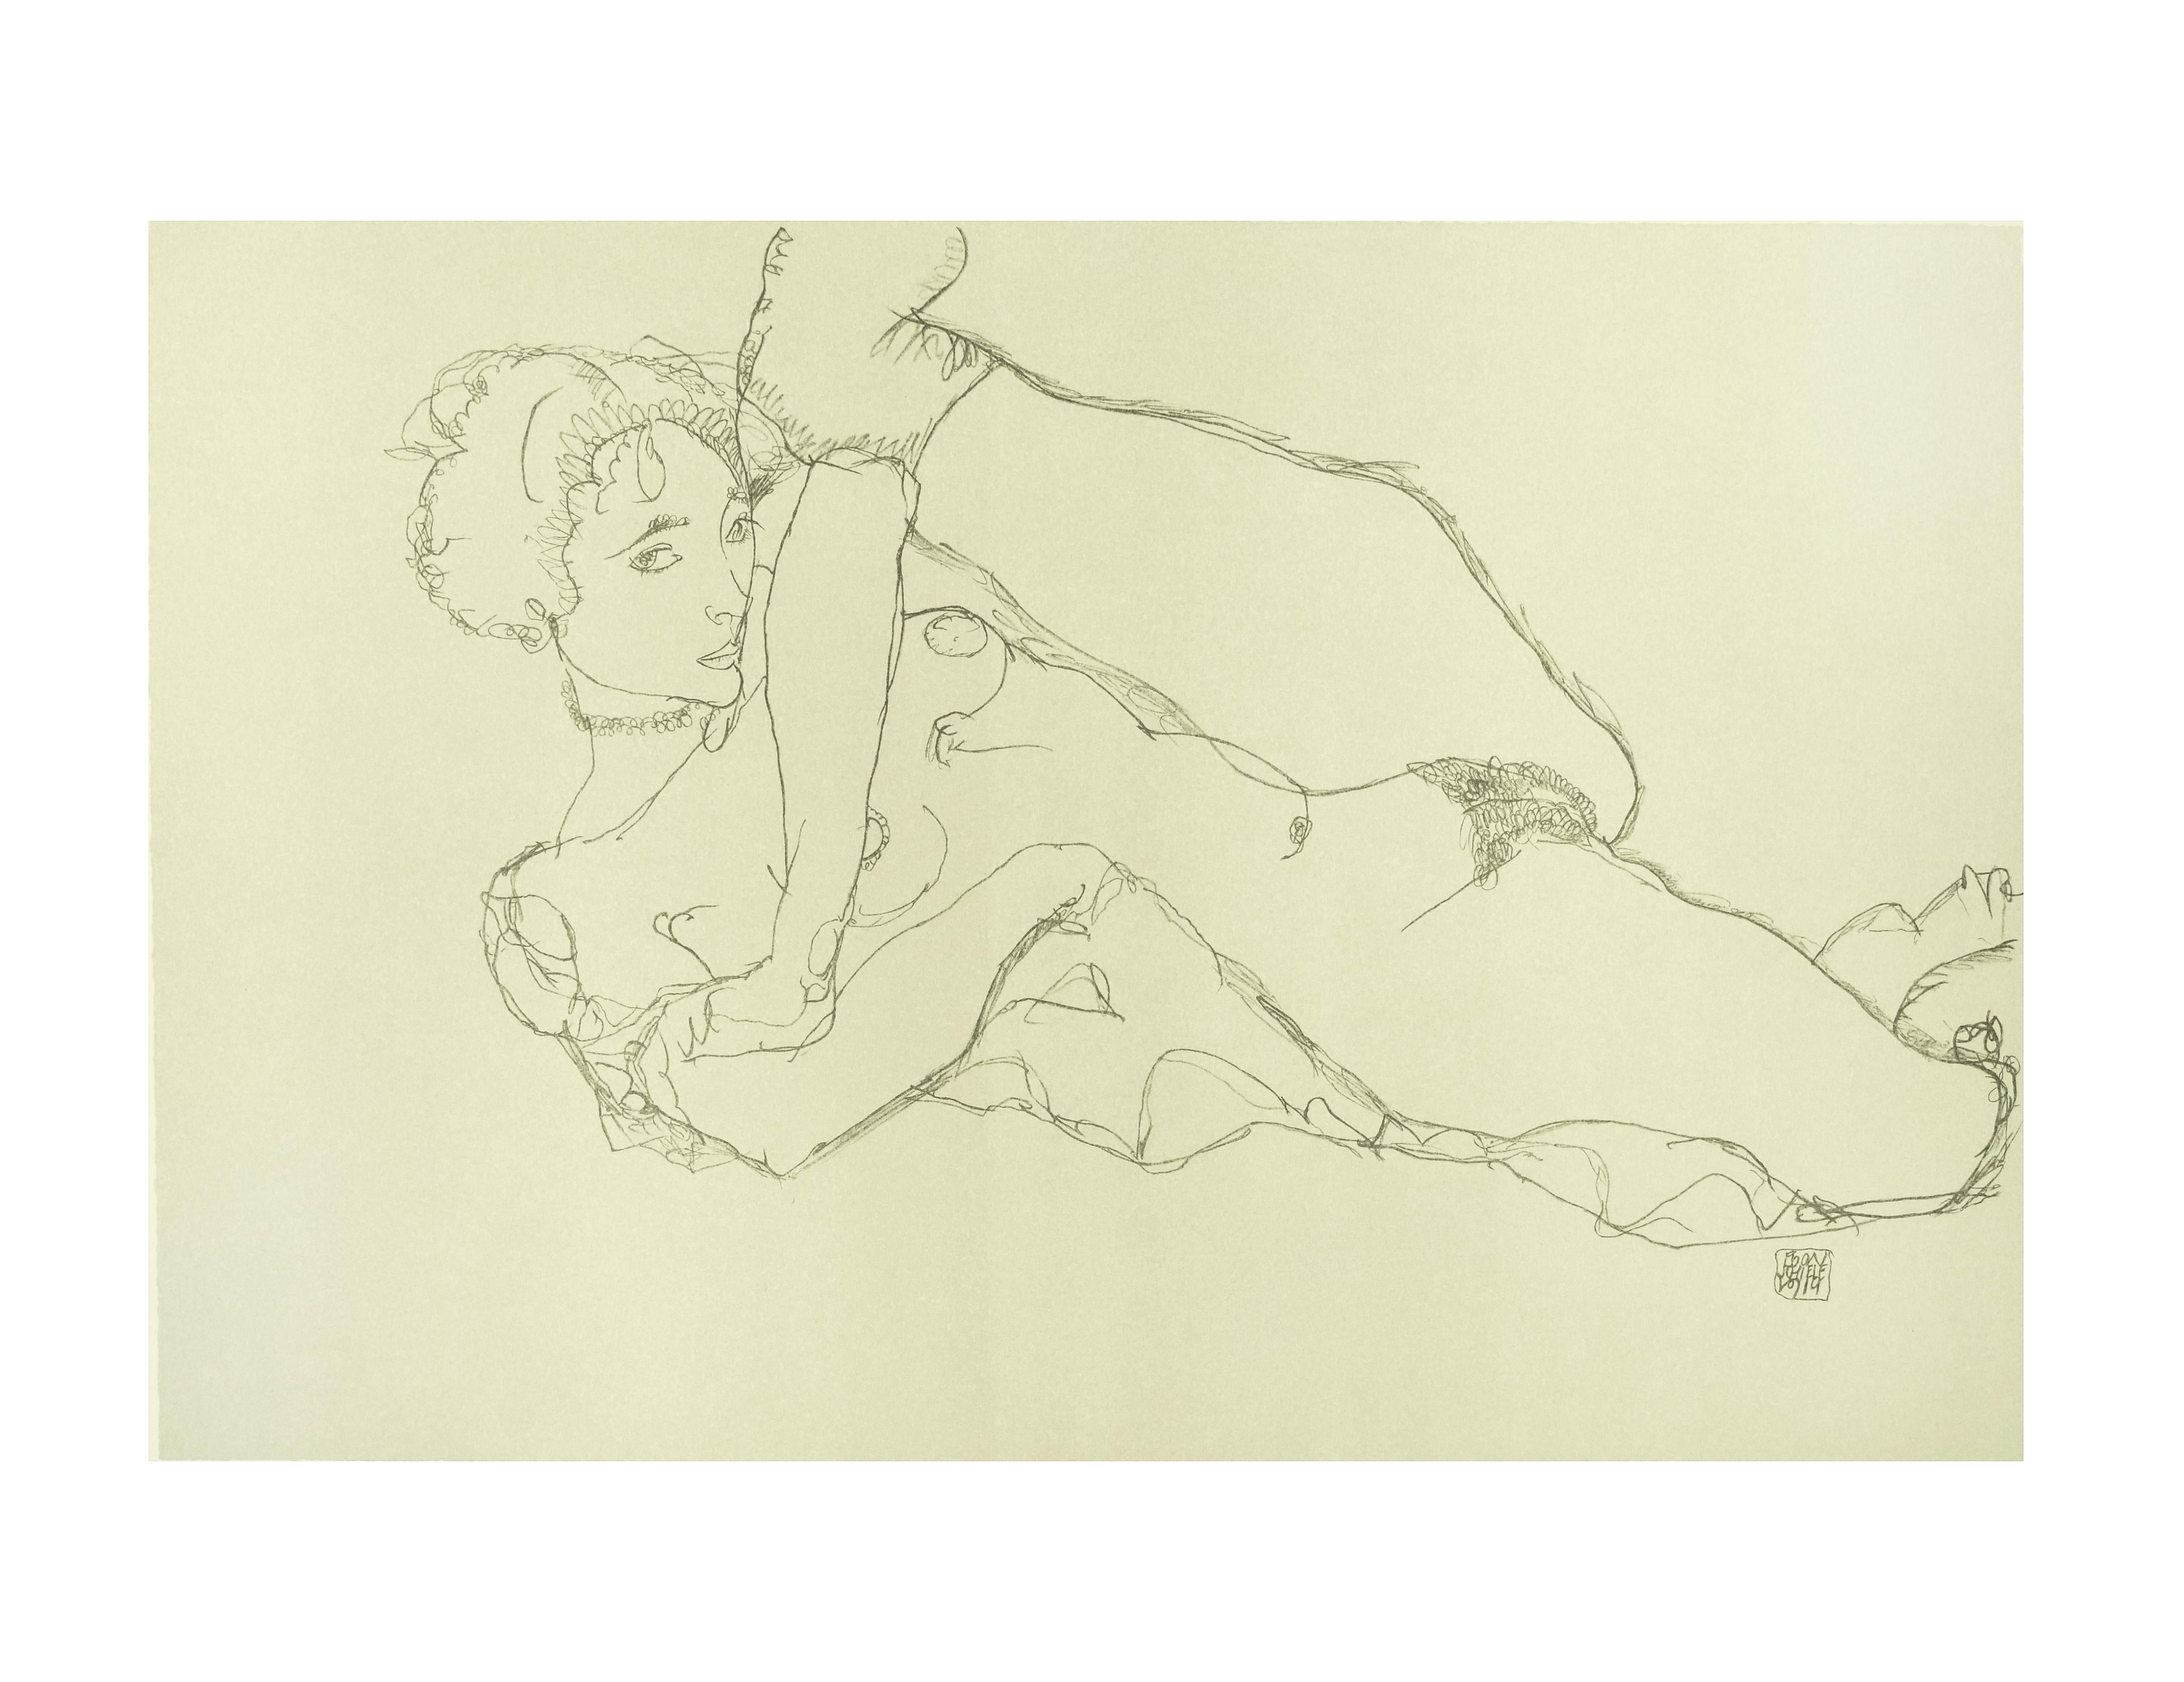 Reclining Nude, Left Leg Raised - 2000s - Lithograph After Egon Schiele